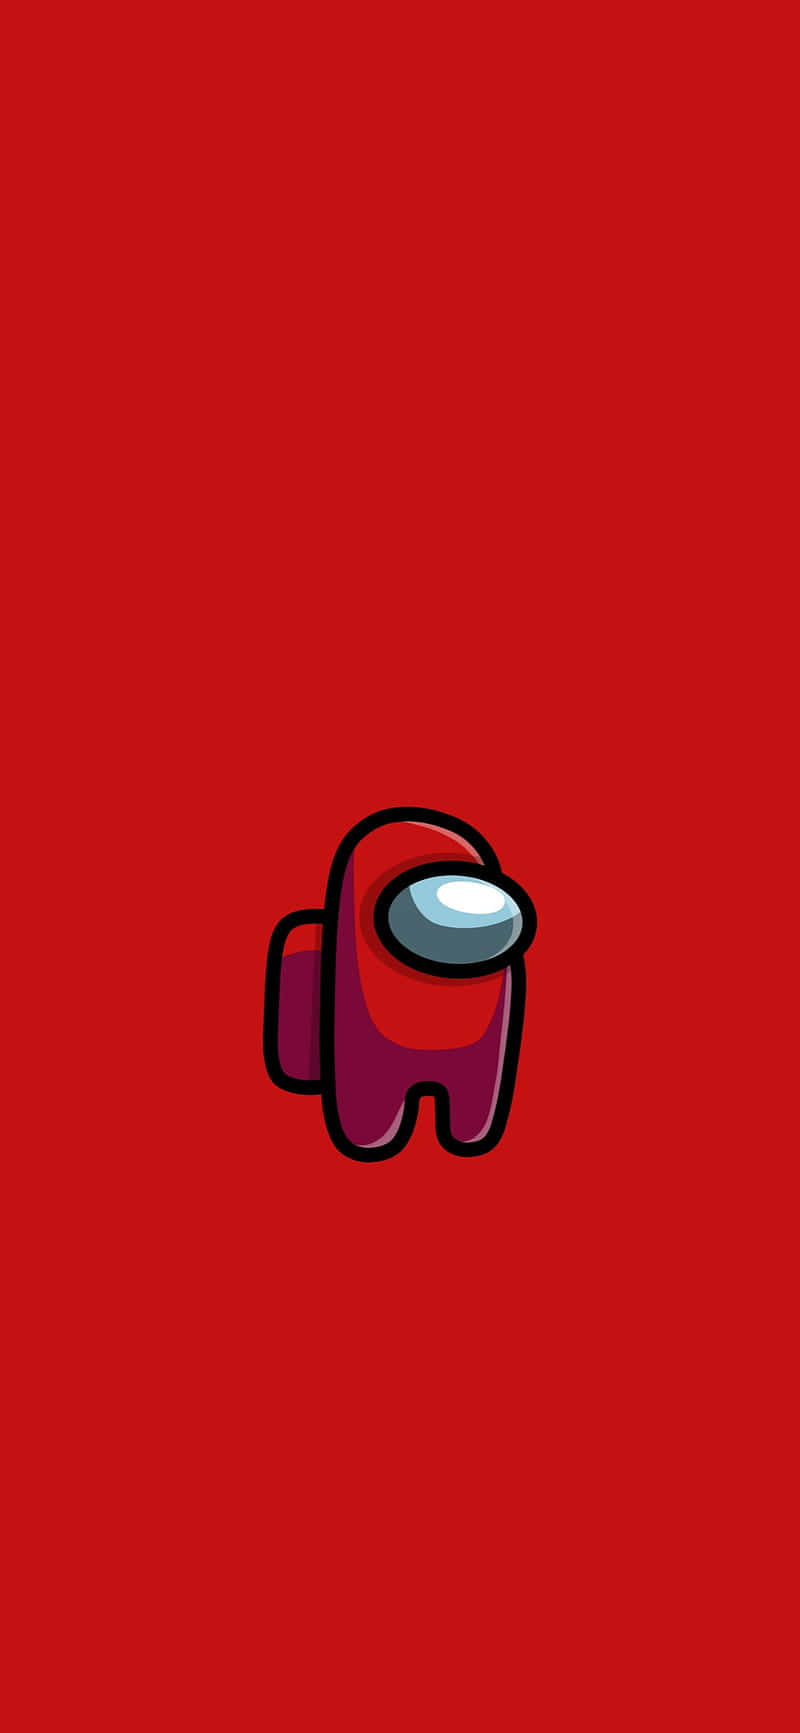 A Red Background With A Red Robot On It Wallpaper